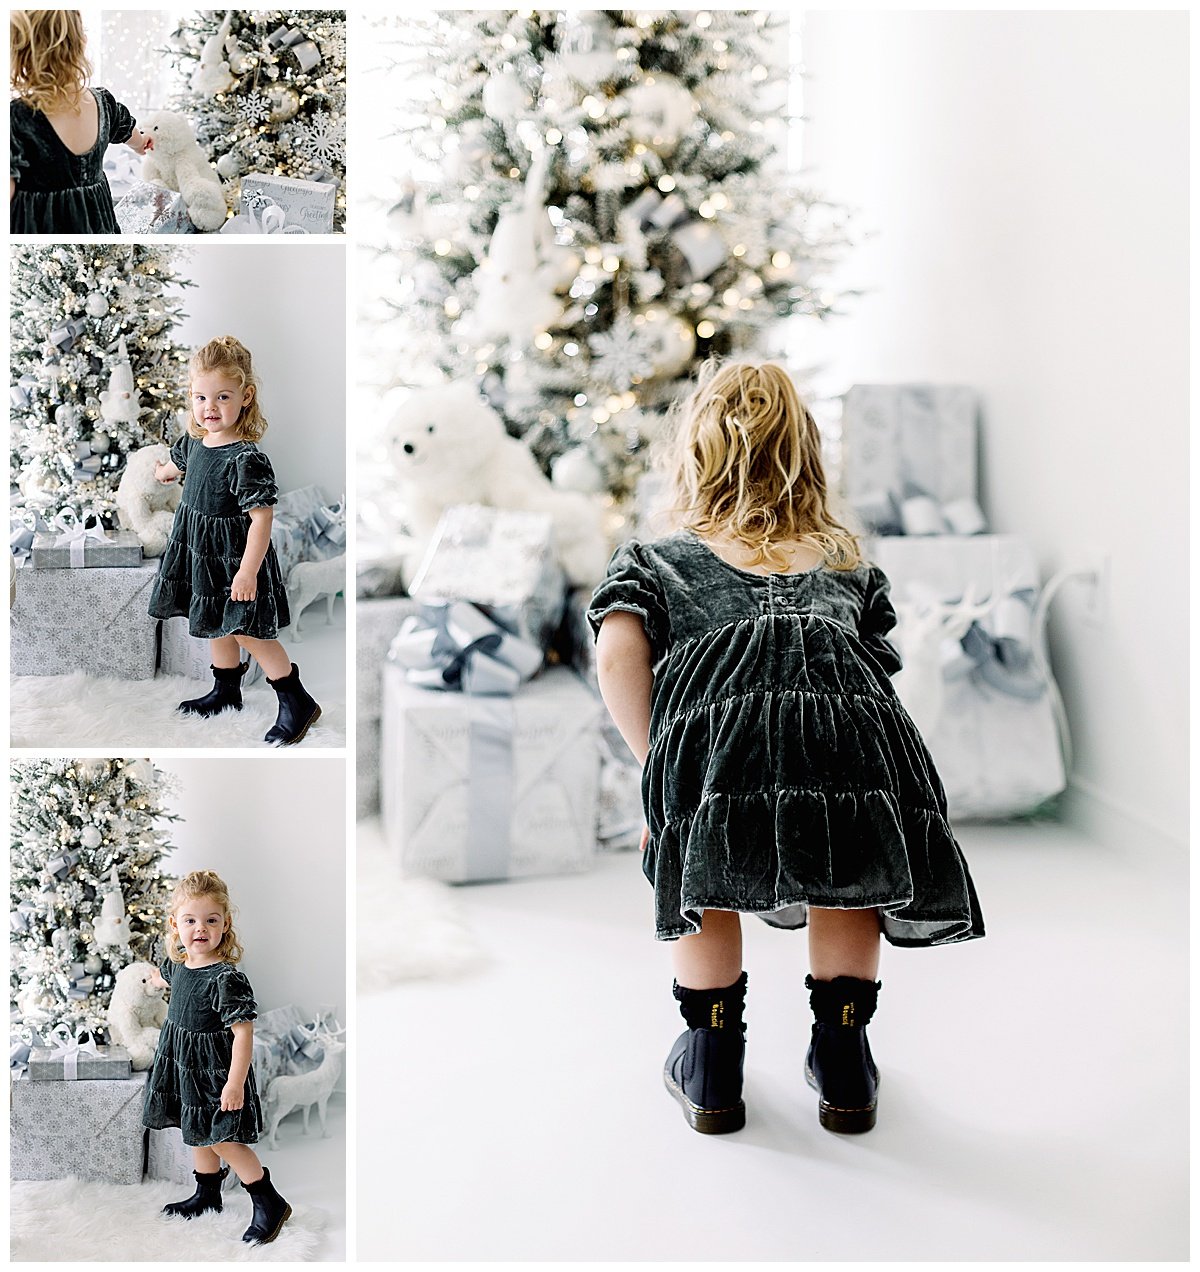 Toddler green dress and Christmas tree